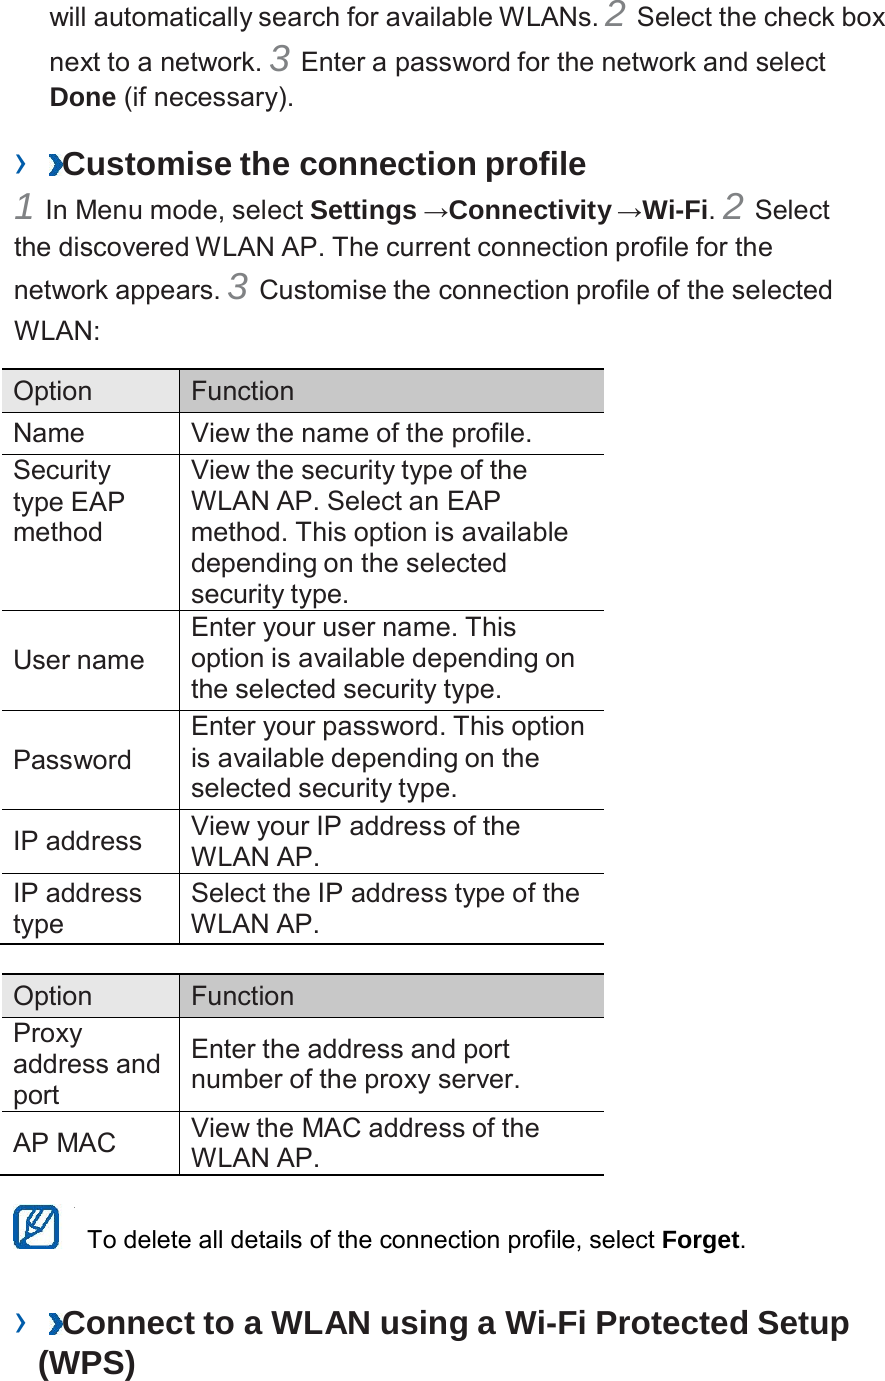  will automatically search for available WLANs. 2 Select the check box next to a network. 3 Enter a password for the network and select Done (if necessary).  ›  Customise the connection profile 1 In Menu mode, select Settings →Connectivity →Wi-Fi. 2 Select the discovered WLAN AP. The current connection profile for the network appears. 3 Customise the connection profile of the selected WLAN:  Option Function Name View the name of the profile. Security type EAP method View the security type of the WLAN AP. Select an EAP method. This option is available depending on the selected security type.   User name Enter your user name. This option is available depending on the selected security type.   Password Enter your password. This option is available depending on the selected security type.  IP address View your IP address of the WLAN AP. IP address type Select the IP address type of the WLAN AP.  Option Function Proxy address and port  Enter the address and port number of the proxy server.  AP MAC View the MAC address of the WLAN AP.   To delete all details of the connection profile, select Forget.   ›  Connect to a WLAN using a Wi-Fi Protected Setup (WPS) 